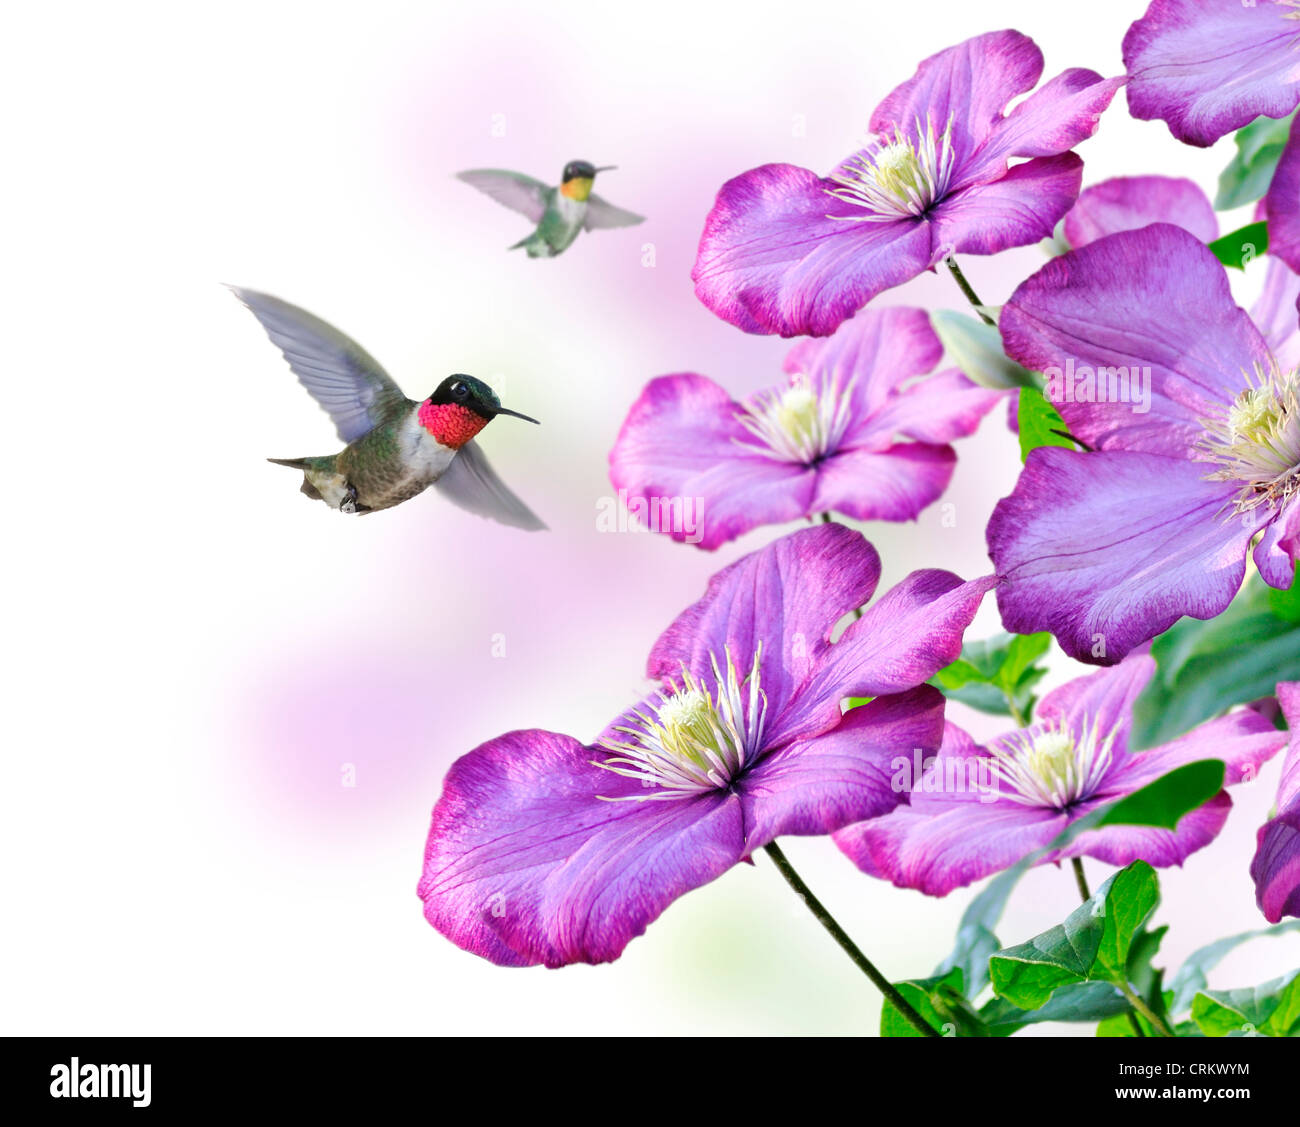 Flowers And Hummingbirds On White Background Stock Photo